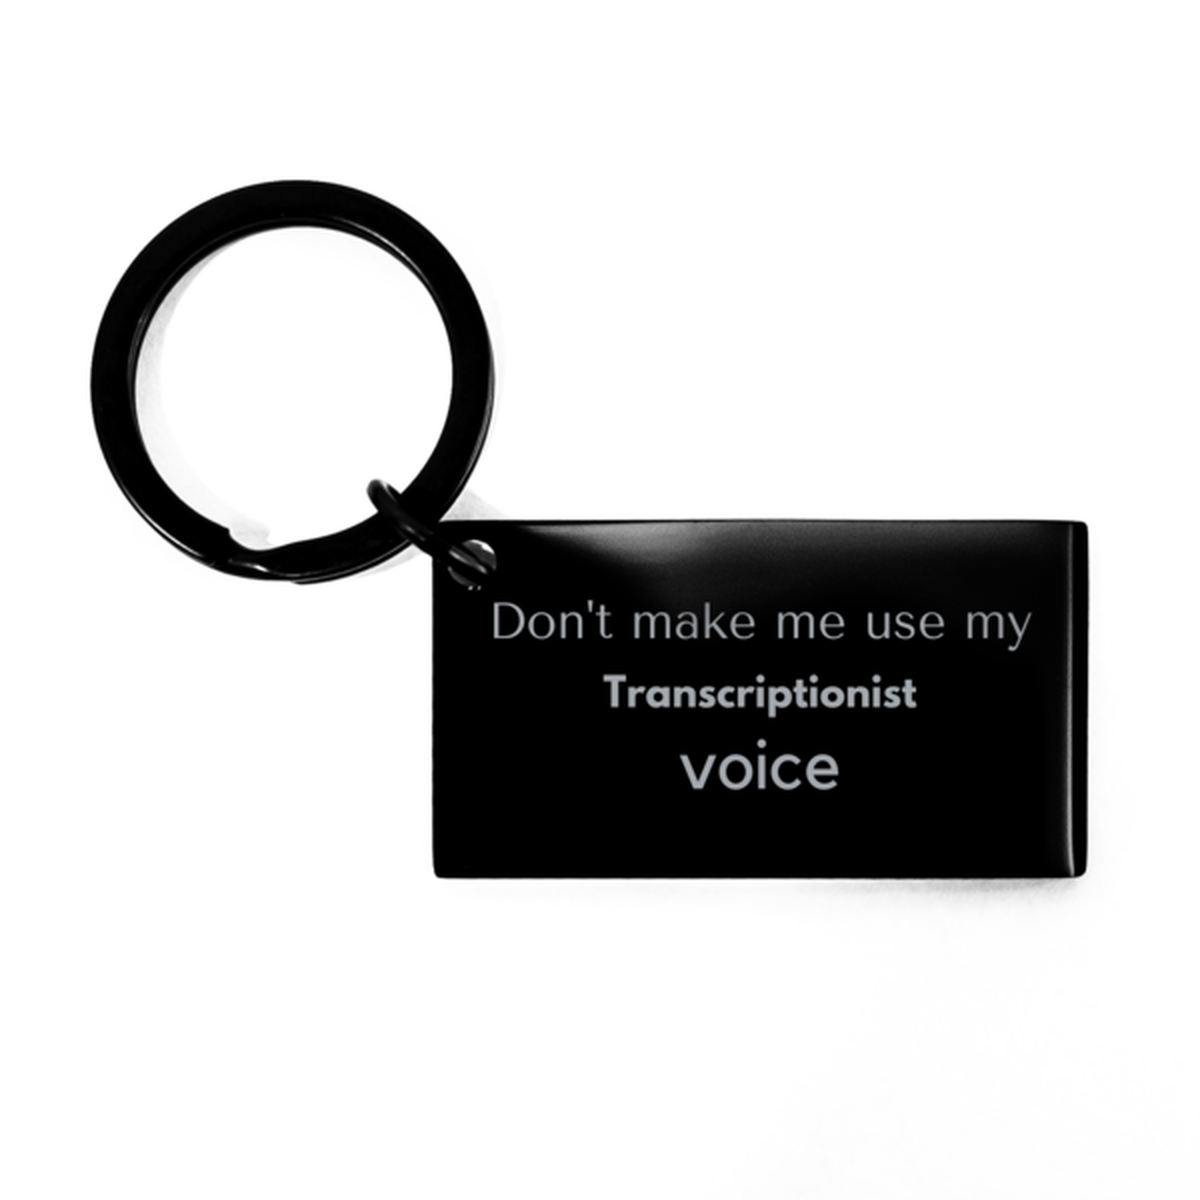 Don't make me use my Transcriptionist voice, Sarcasm Transcriptionist Gifts, Christmas Transcriptionist Keychain Birthday Unique Gifts For Transcriptionist Coworkers, Men, Women, Colleague, Friends